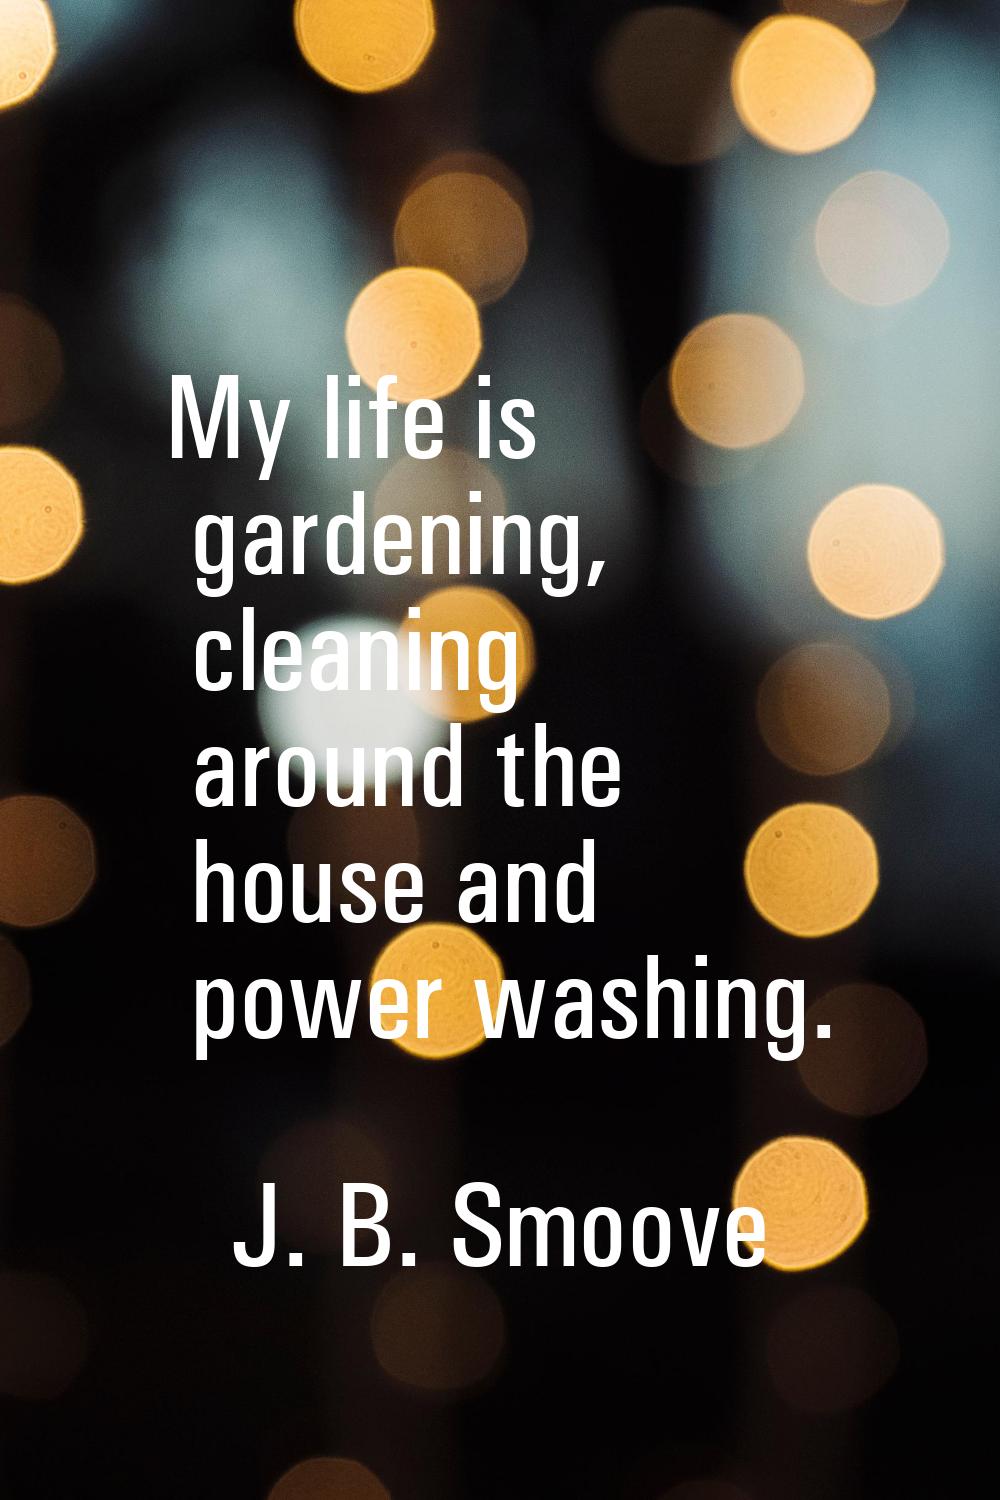 My life is gardening, cleaning around the house and power washing.